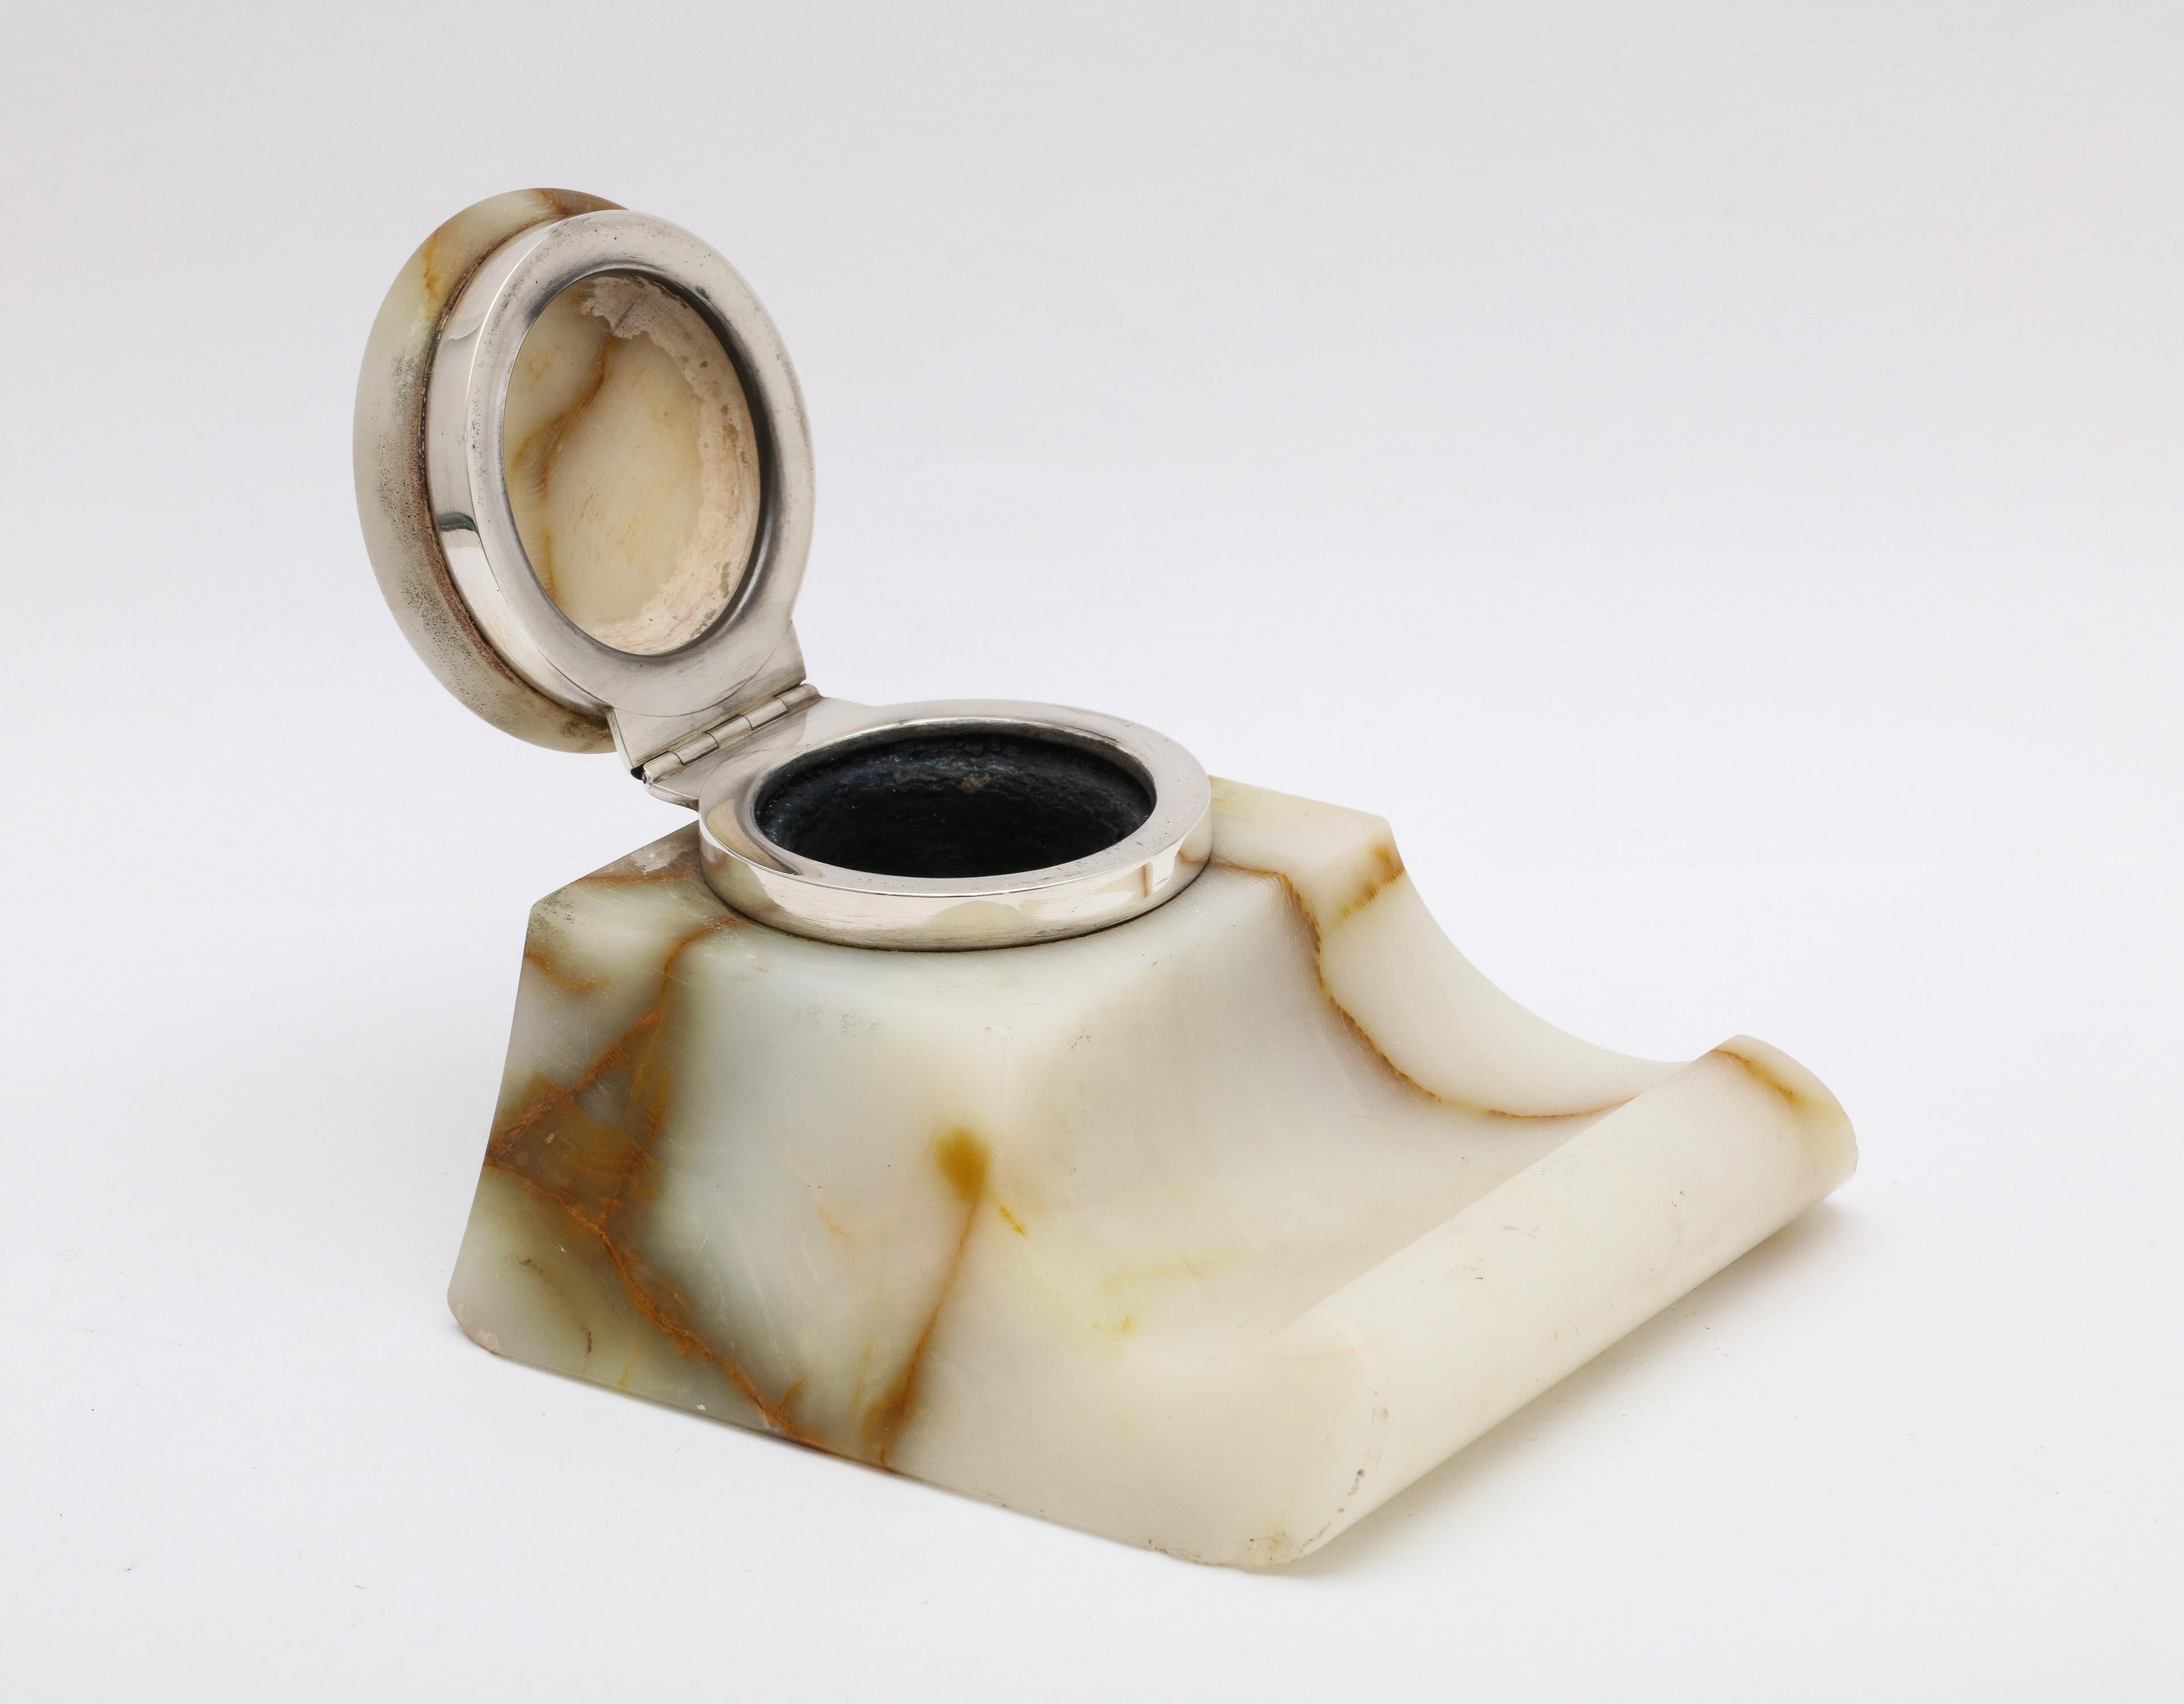 Edwardian Sterling Silver-Mounted Onyx Inkwell For Sale 2